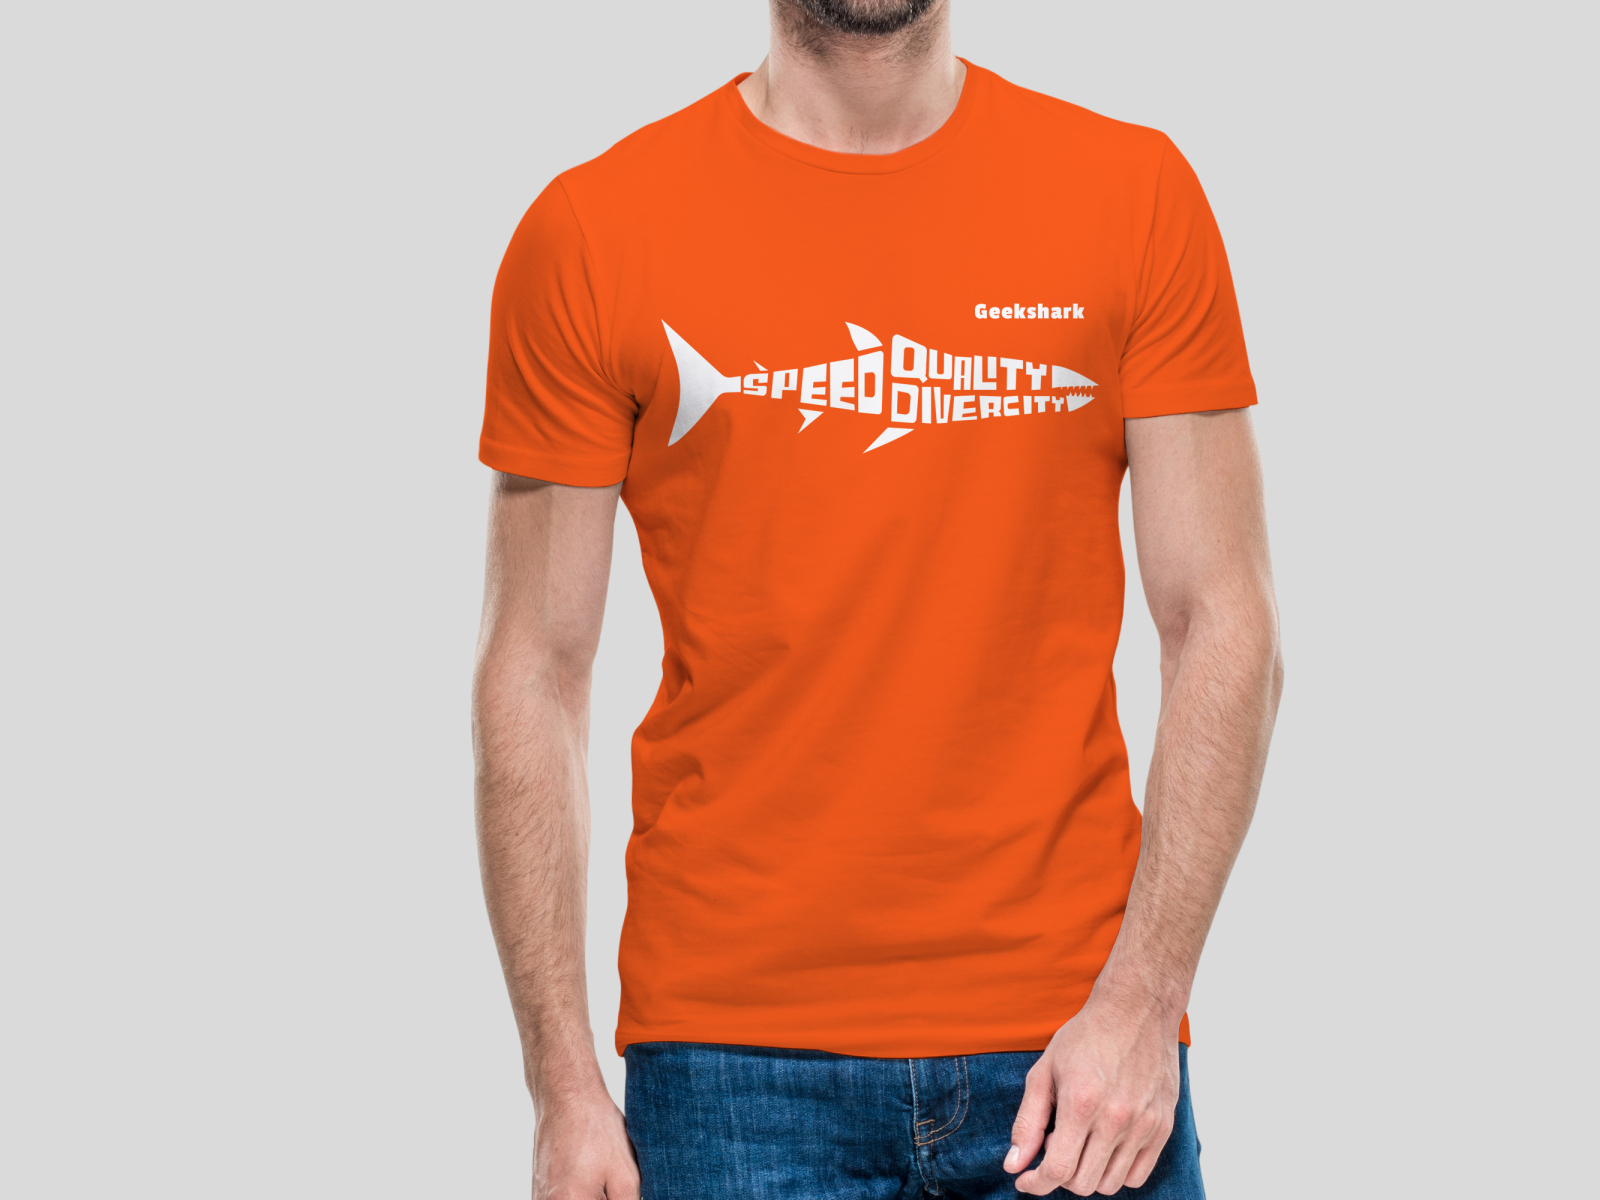 T- Shirt Design for a Marketing Agency by Jahid Hasan on Dribbble